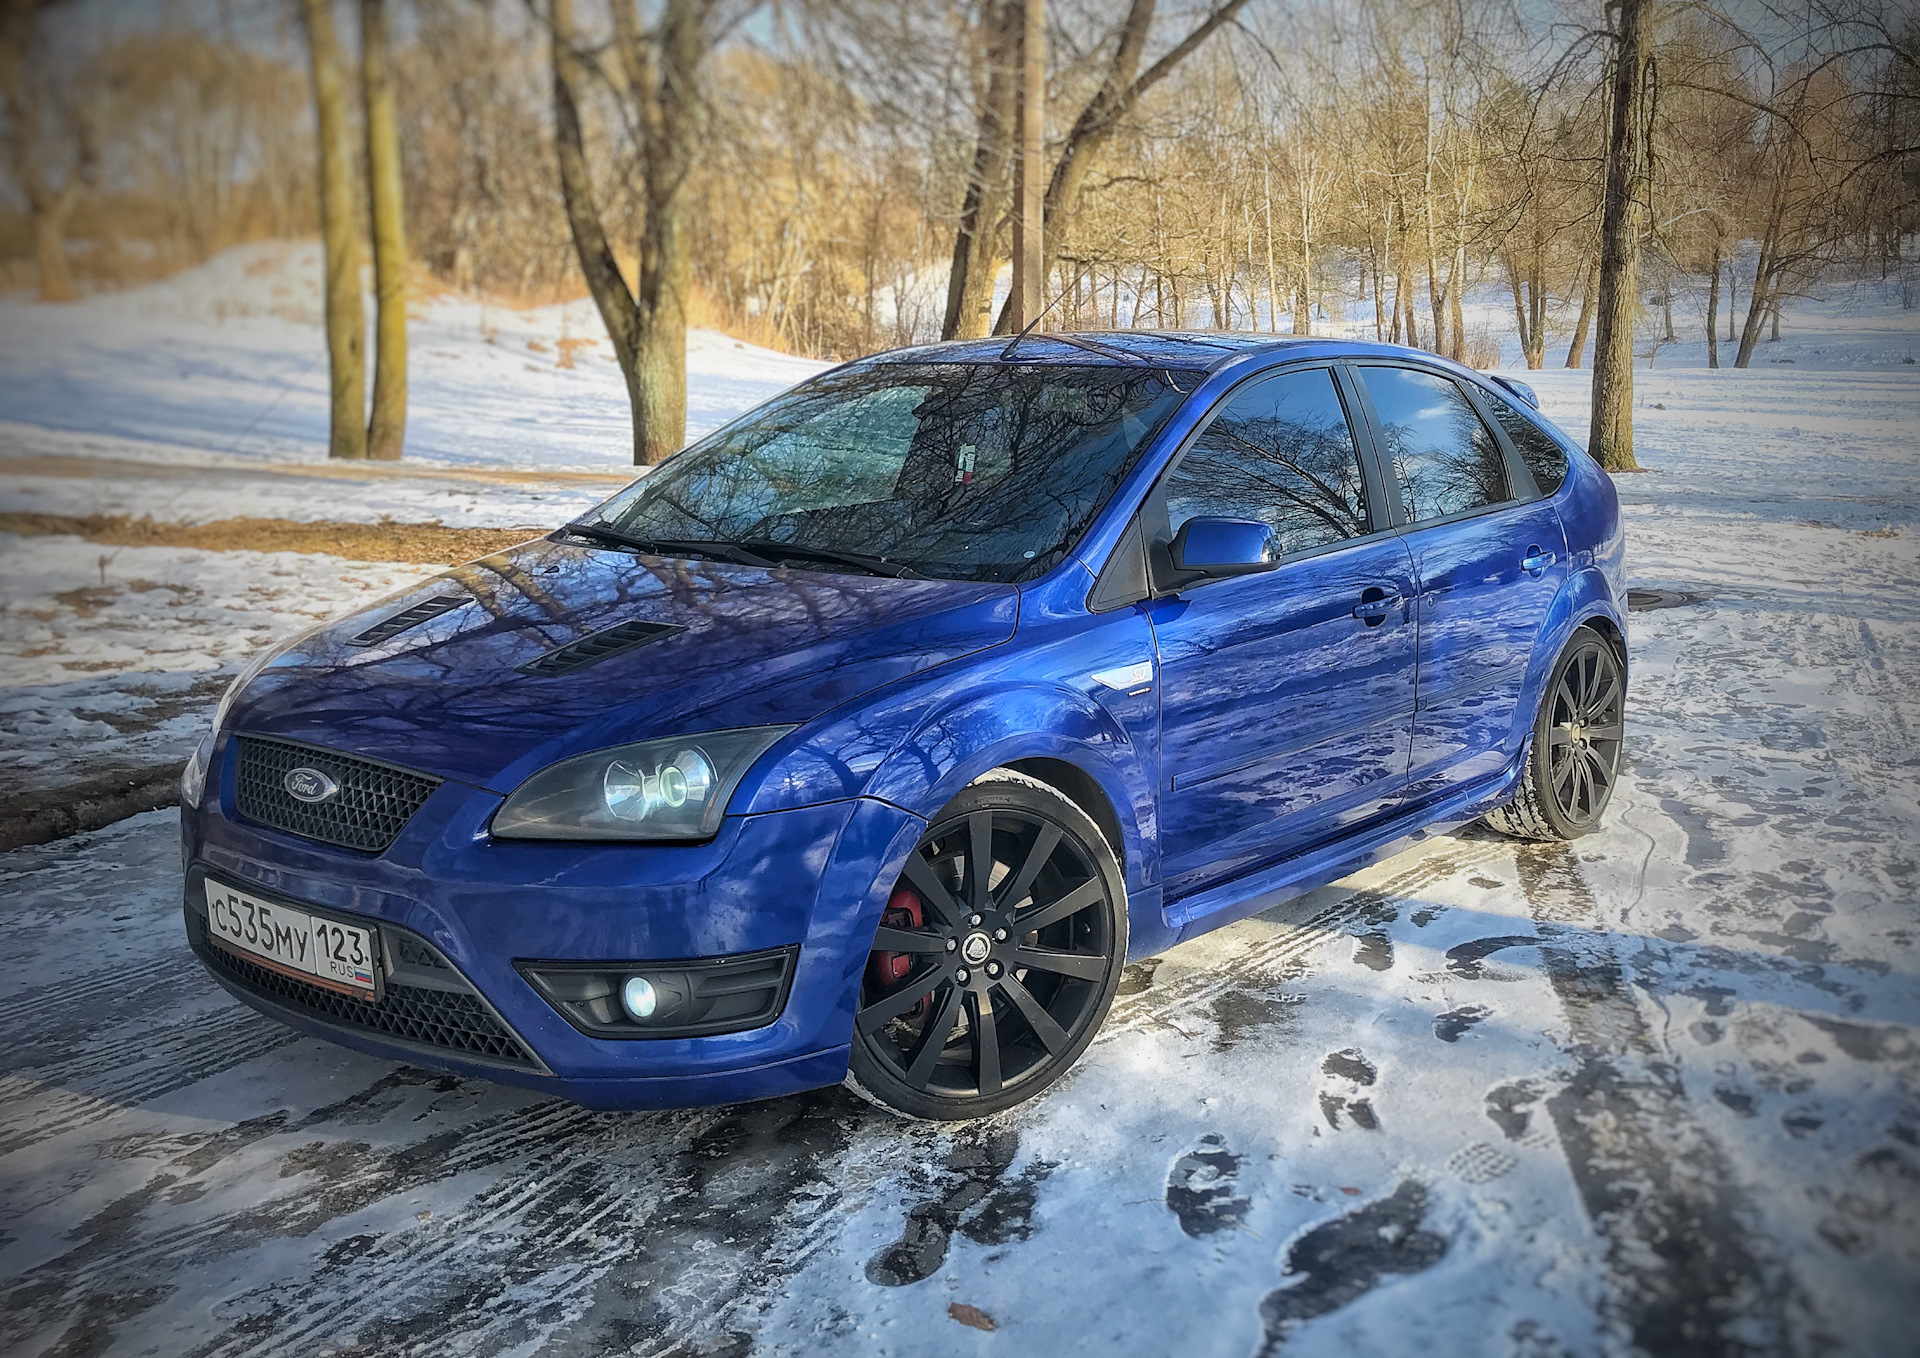 Тест форд фокус 2. Форд фокус 2 r19. Ford Focus 2 drive2. Ford Focus St 2 Blue. Ford Focus r19.